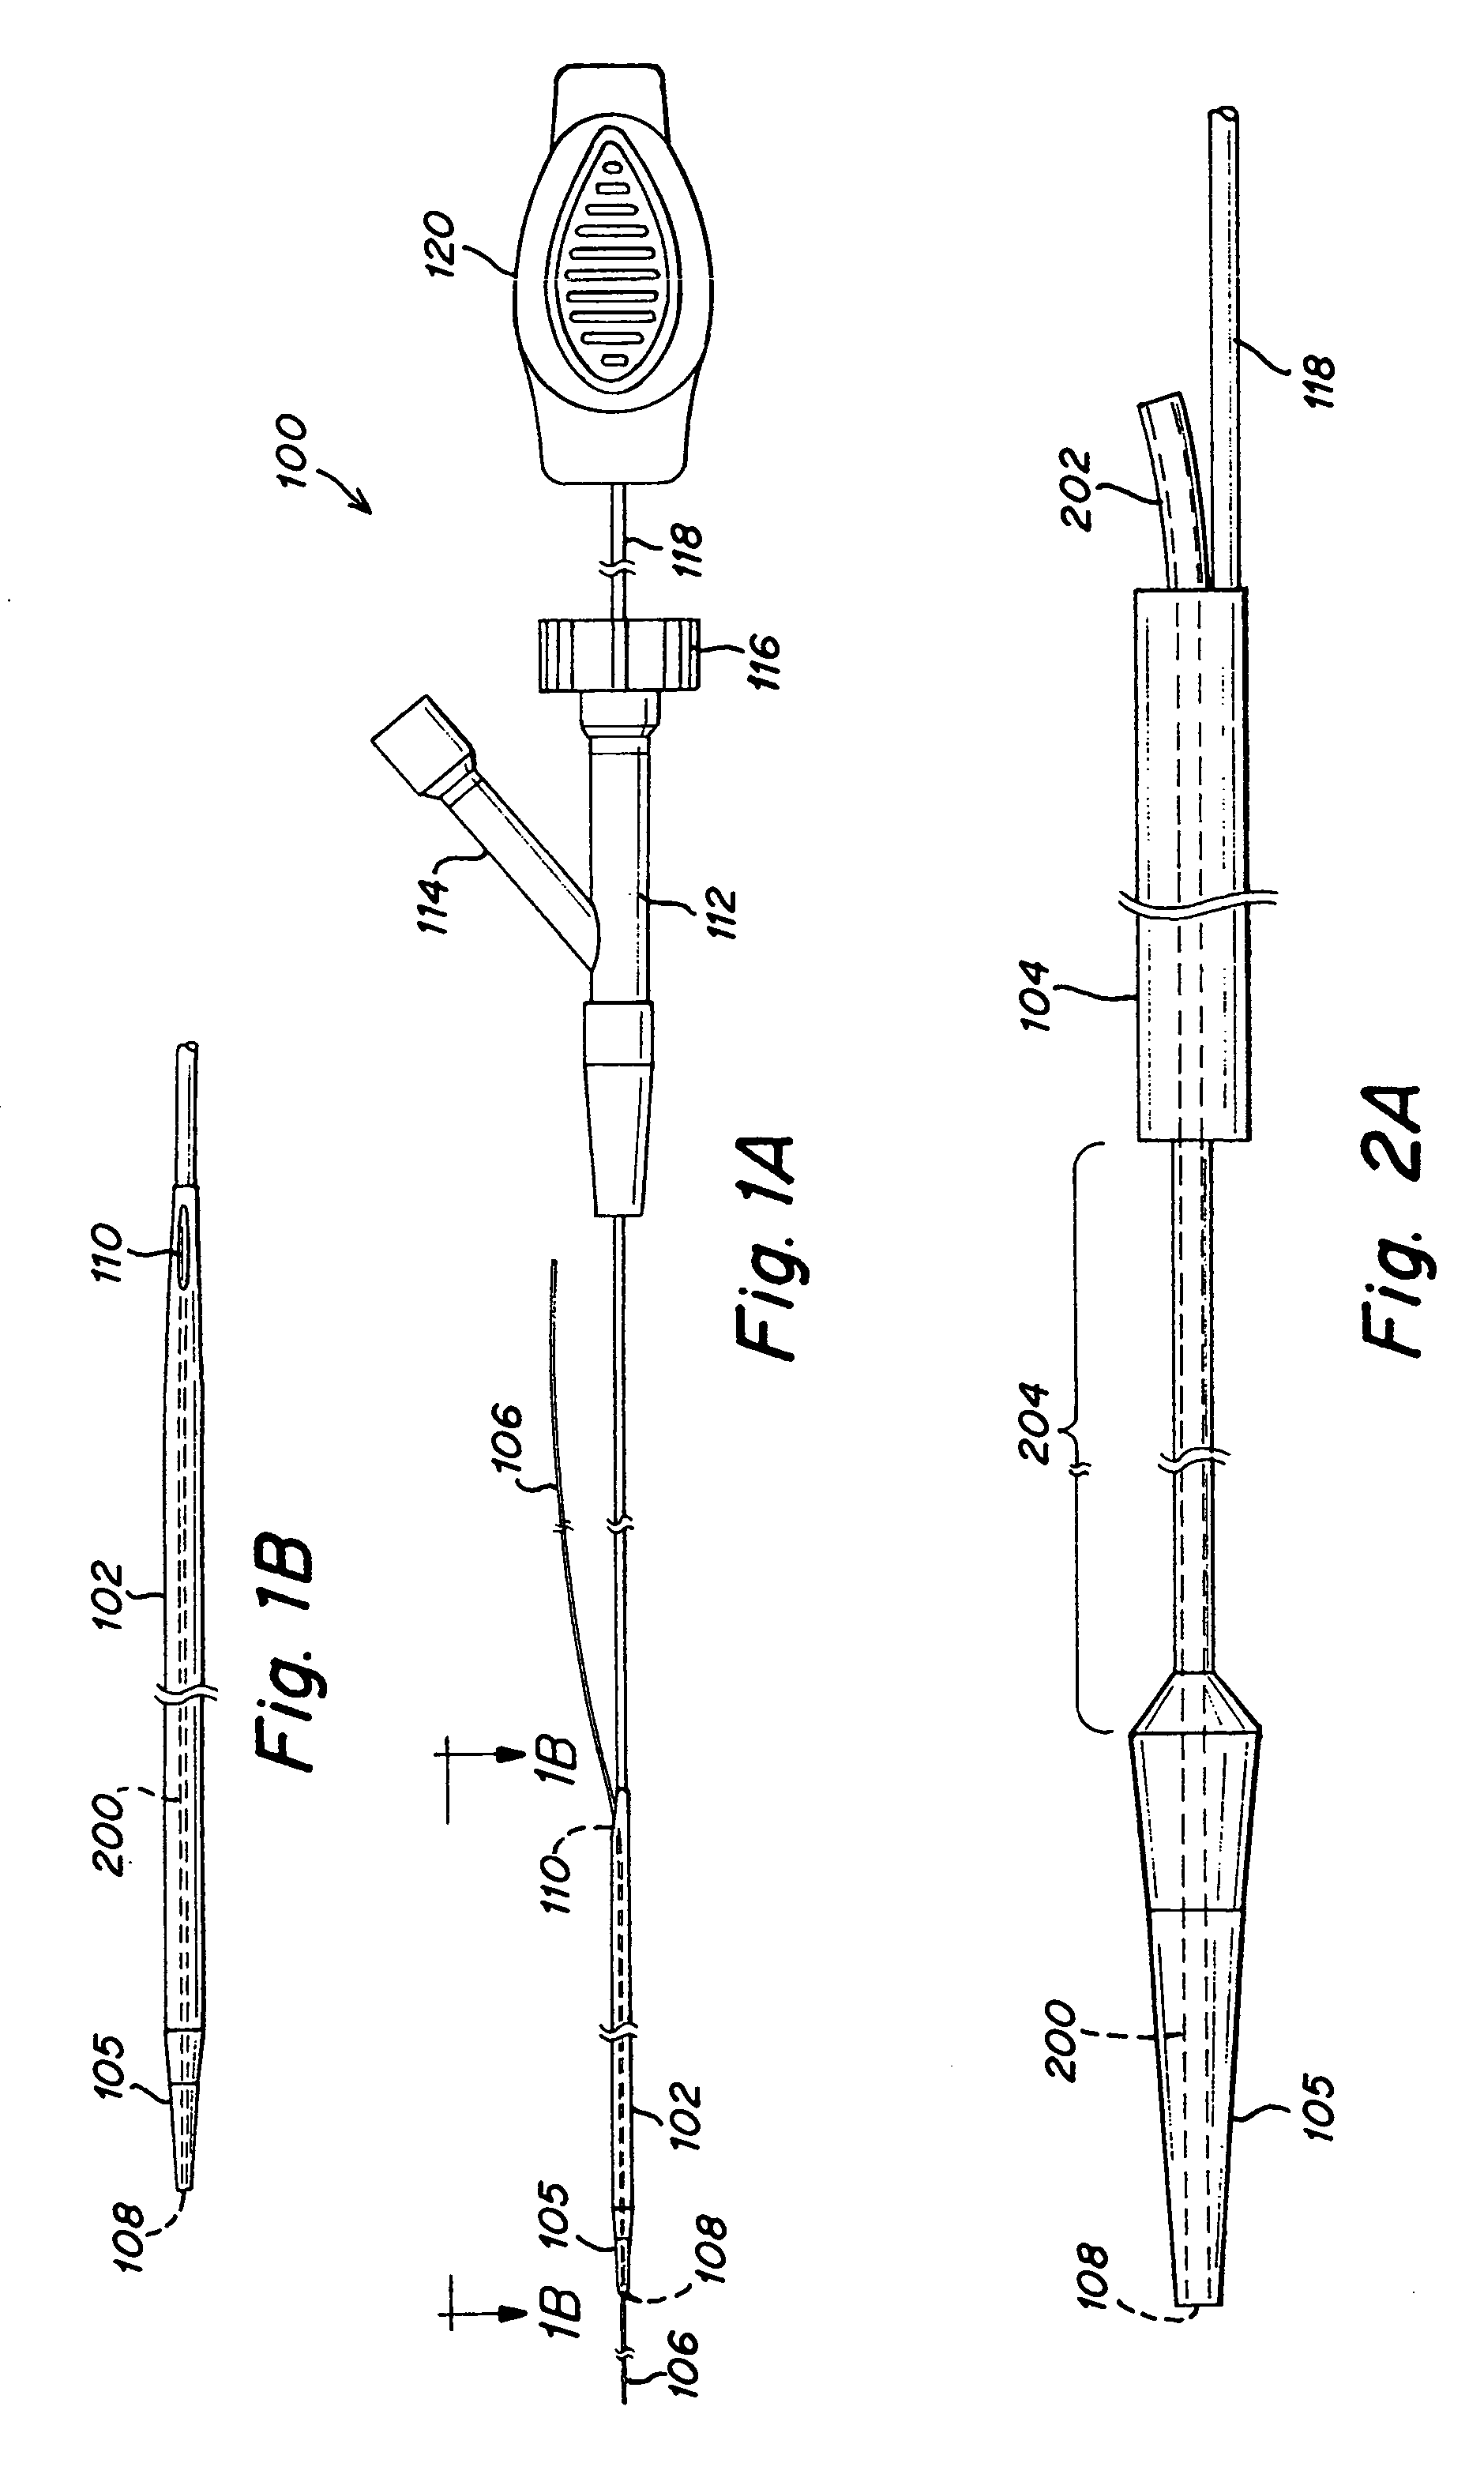 Implant delivery system with interlocked RX port orientation